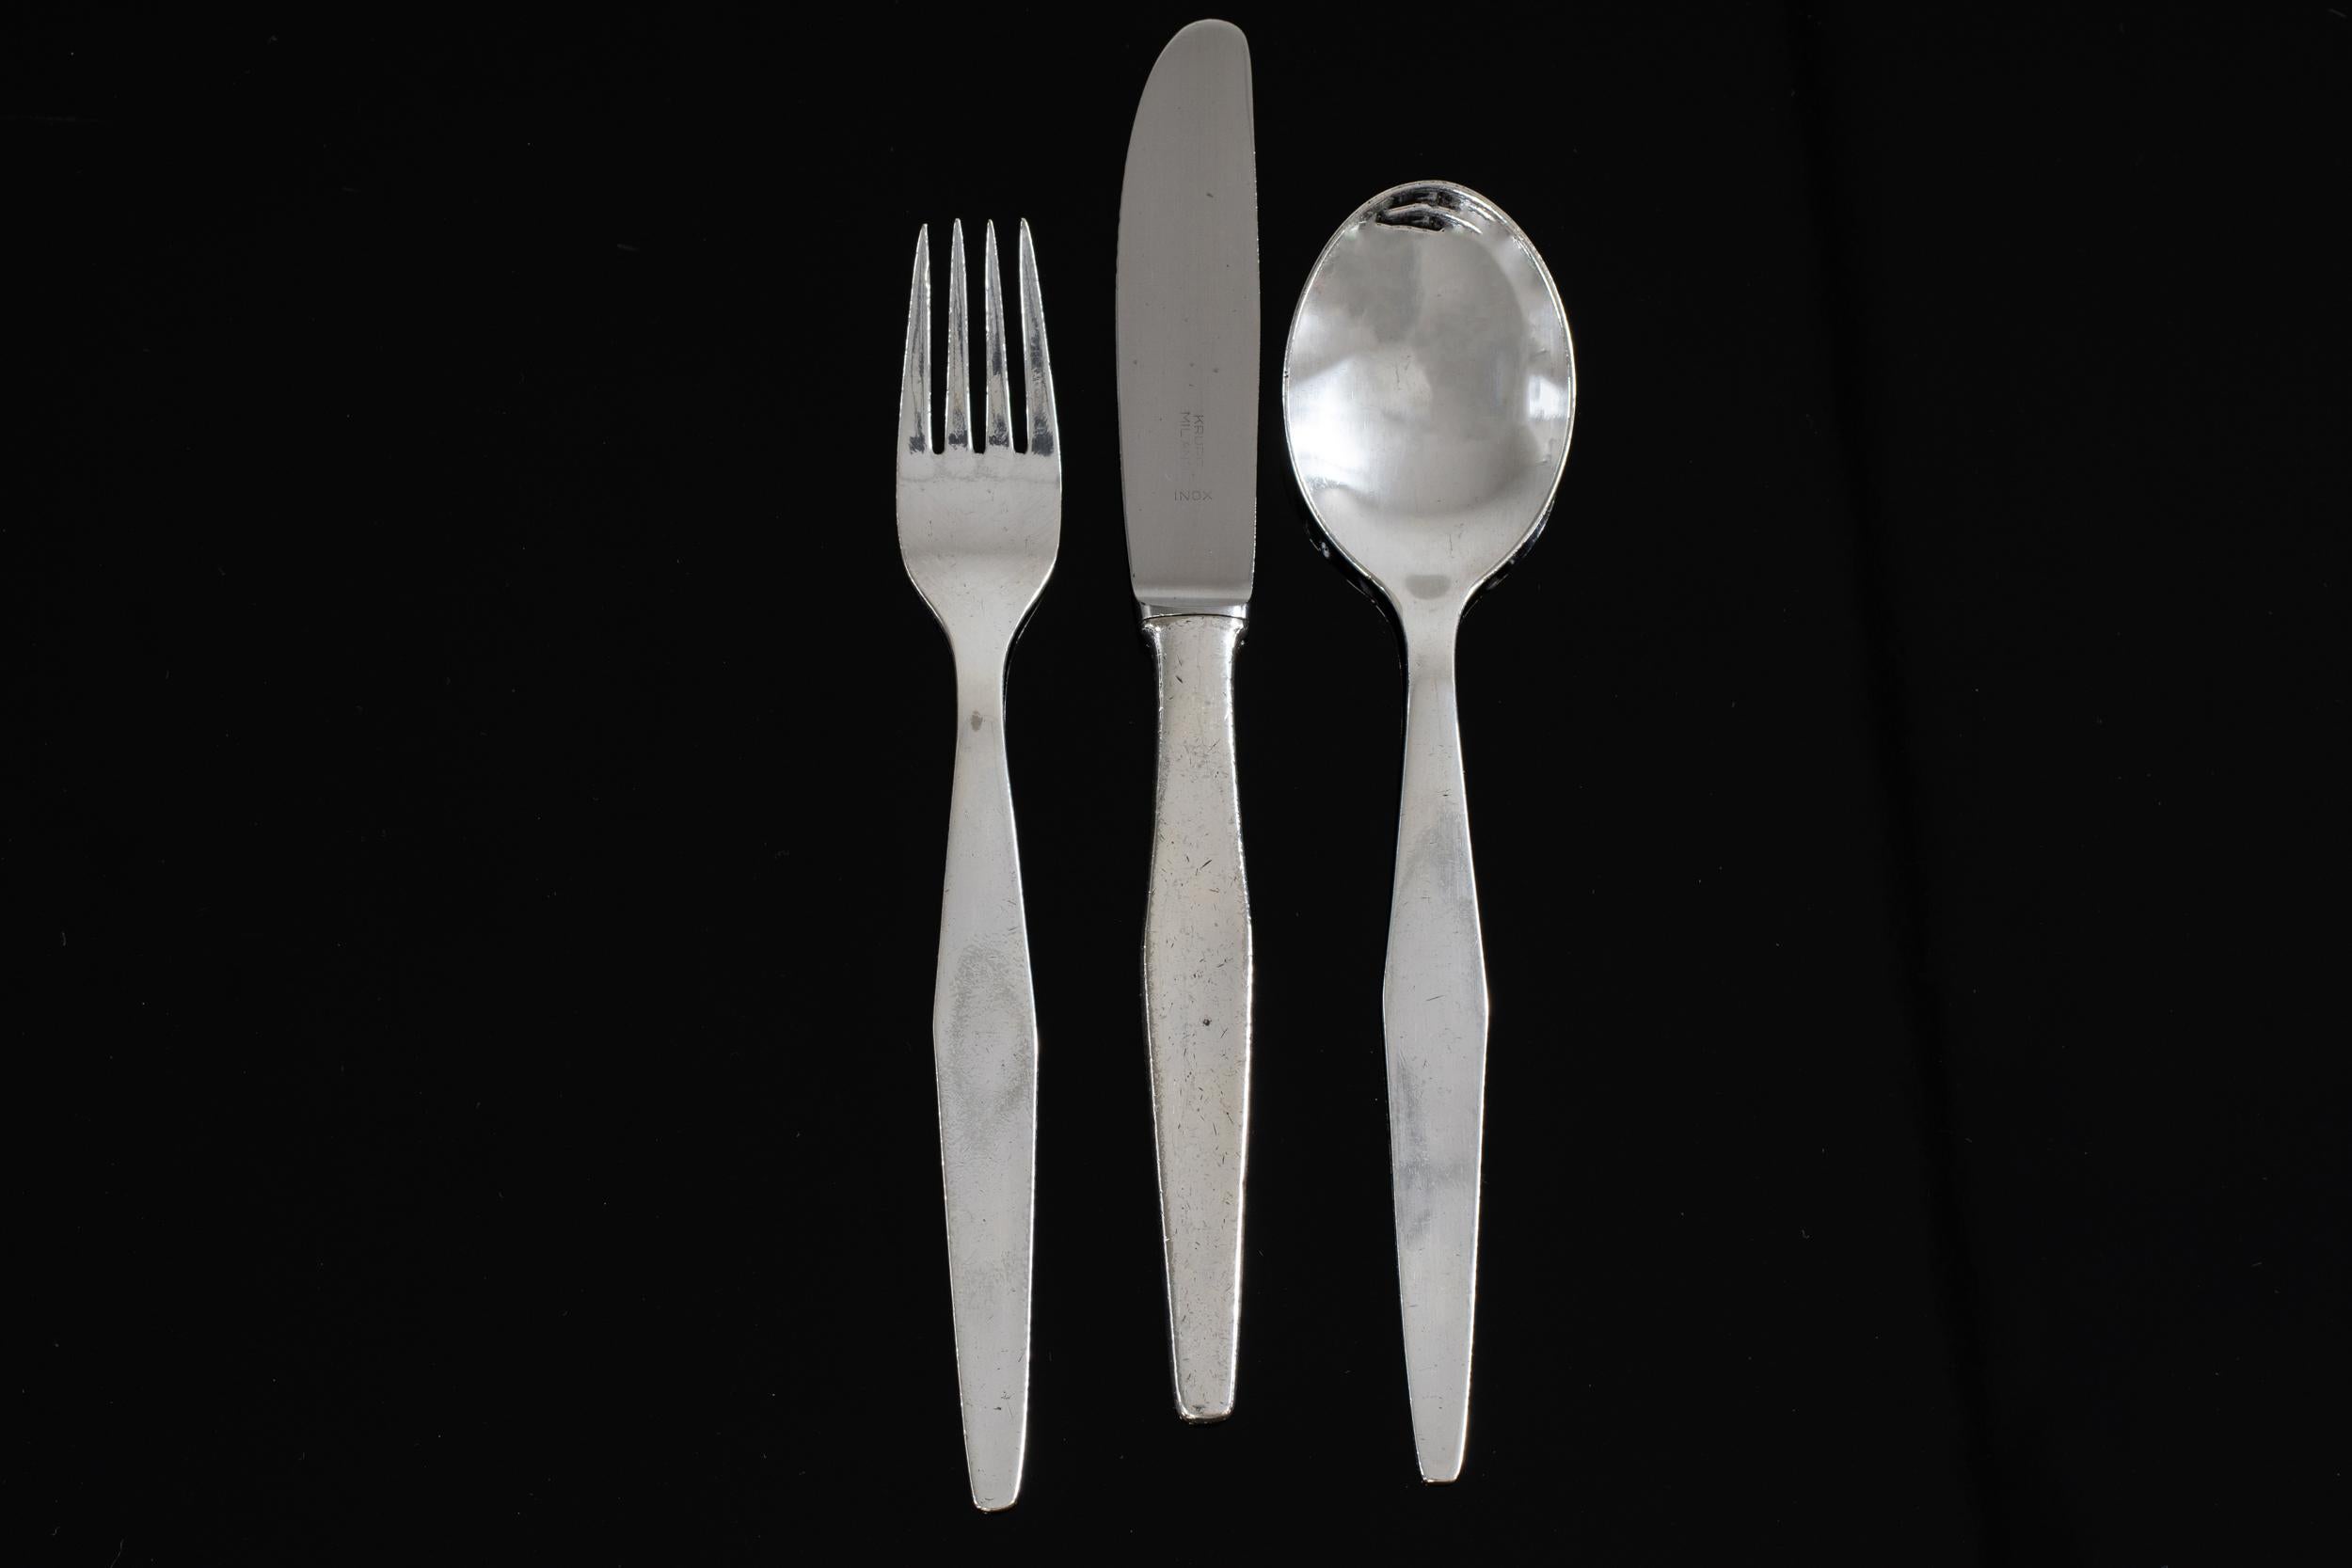 Mid-Century Modern Gio Ponti Cutlery Silver Service for Six in Nickel Silver by Krupp, Italy, 1950s